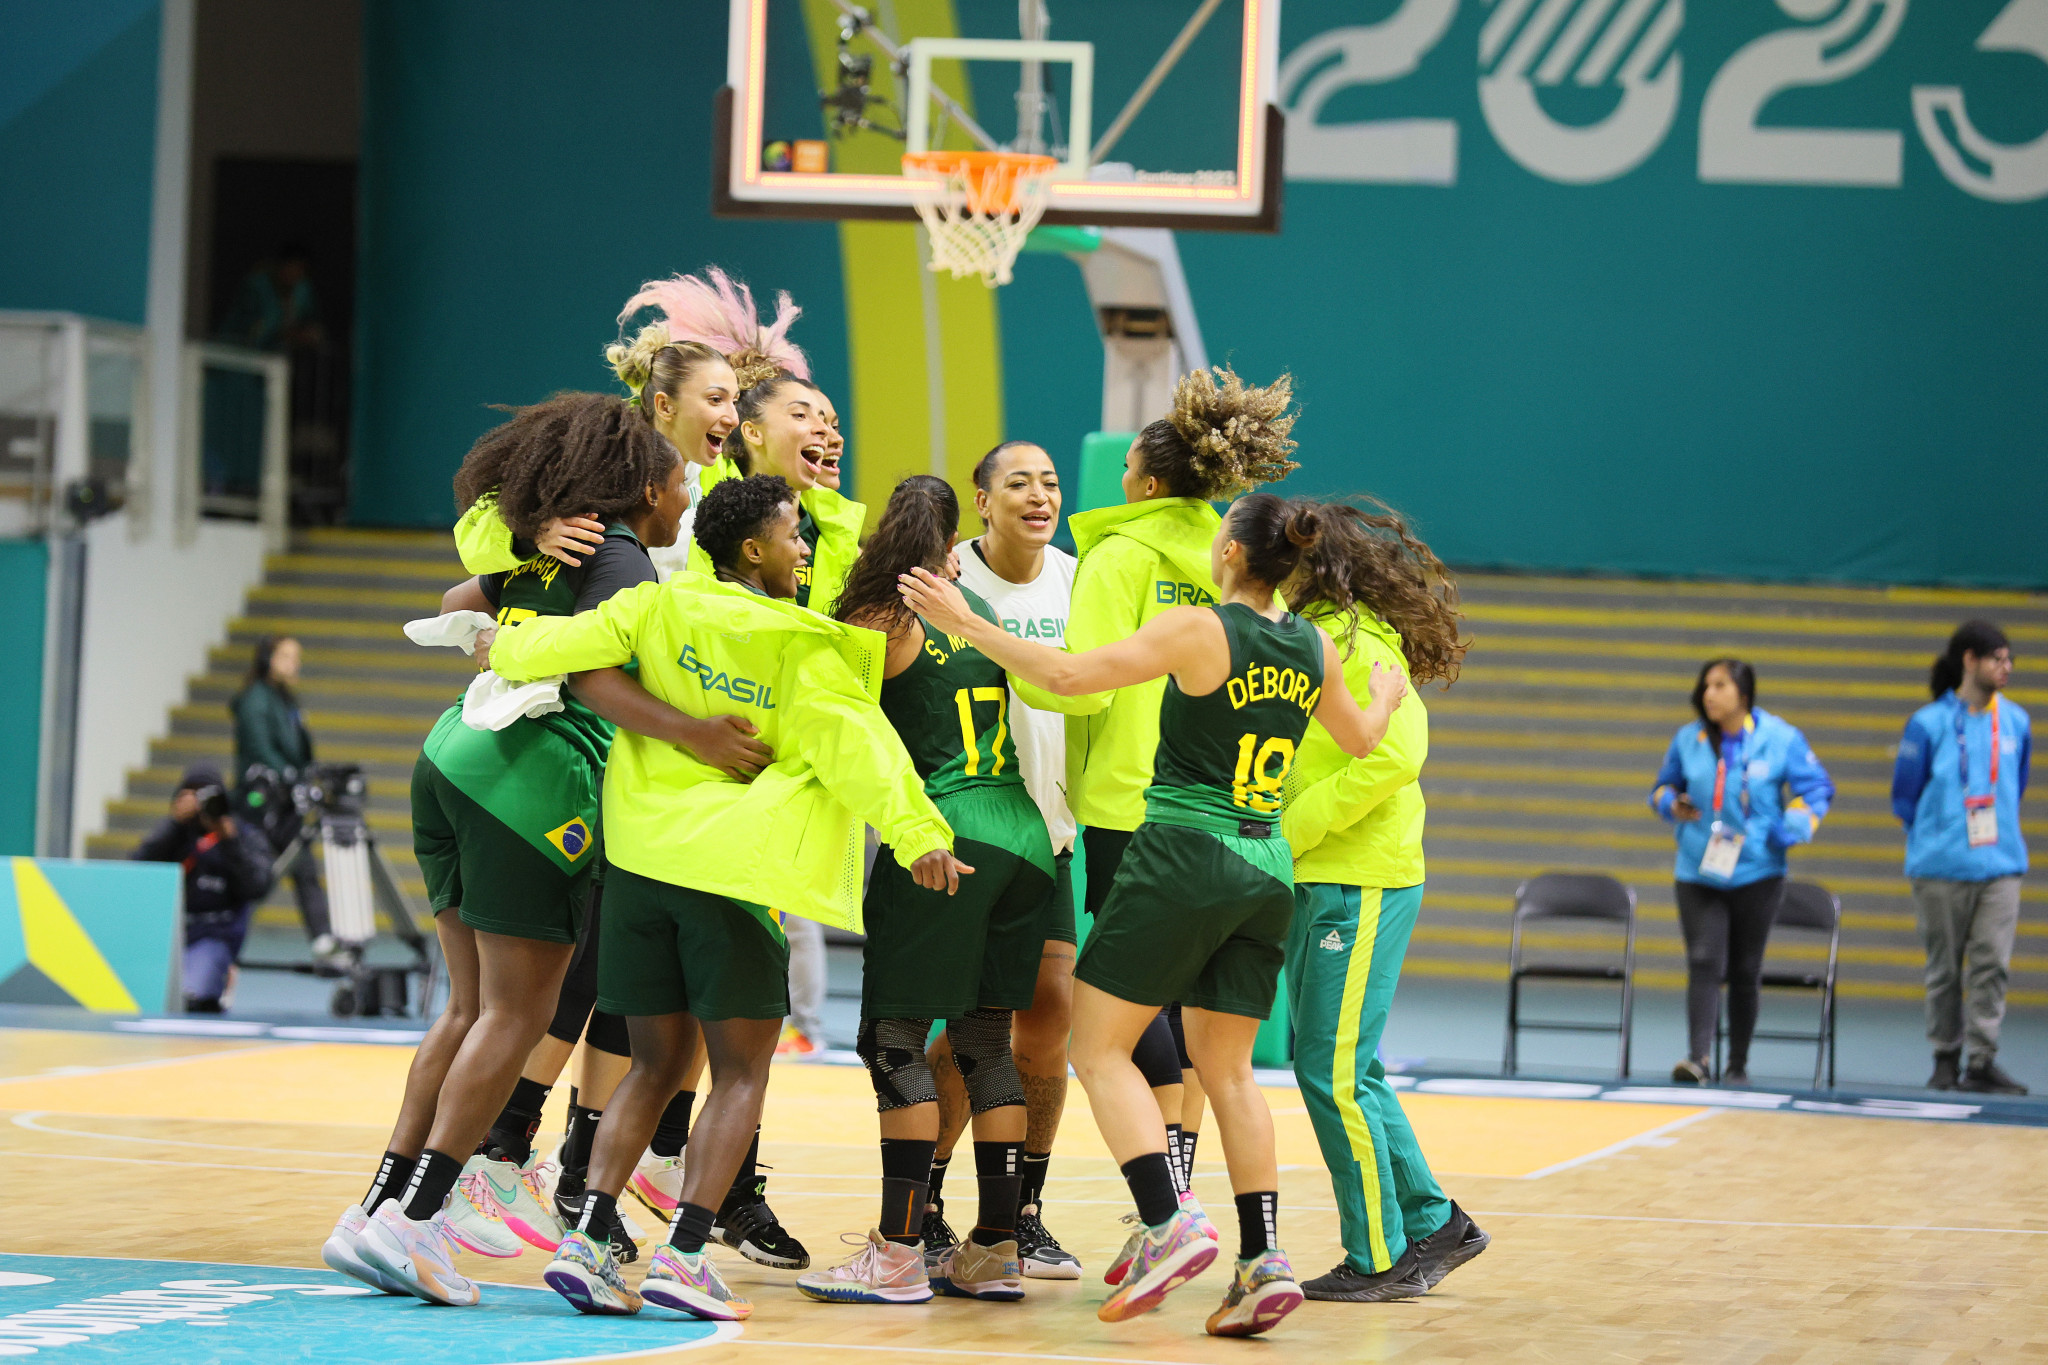 Brazil had a great day in team sports, as they won the basketball final against Colombia 50-40 ©Getty Images 